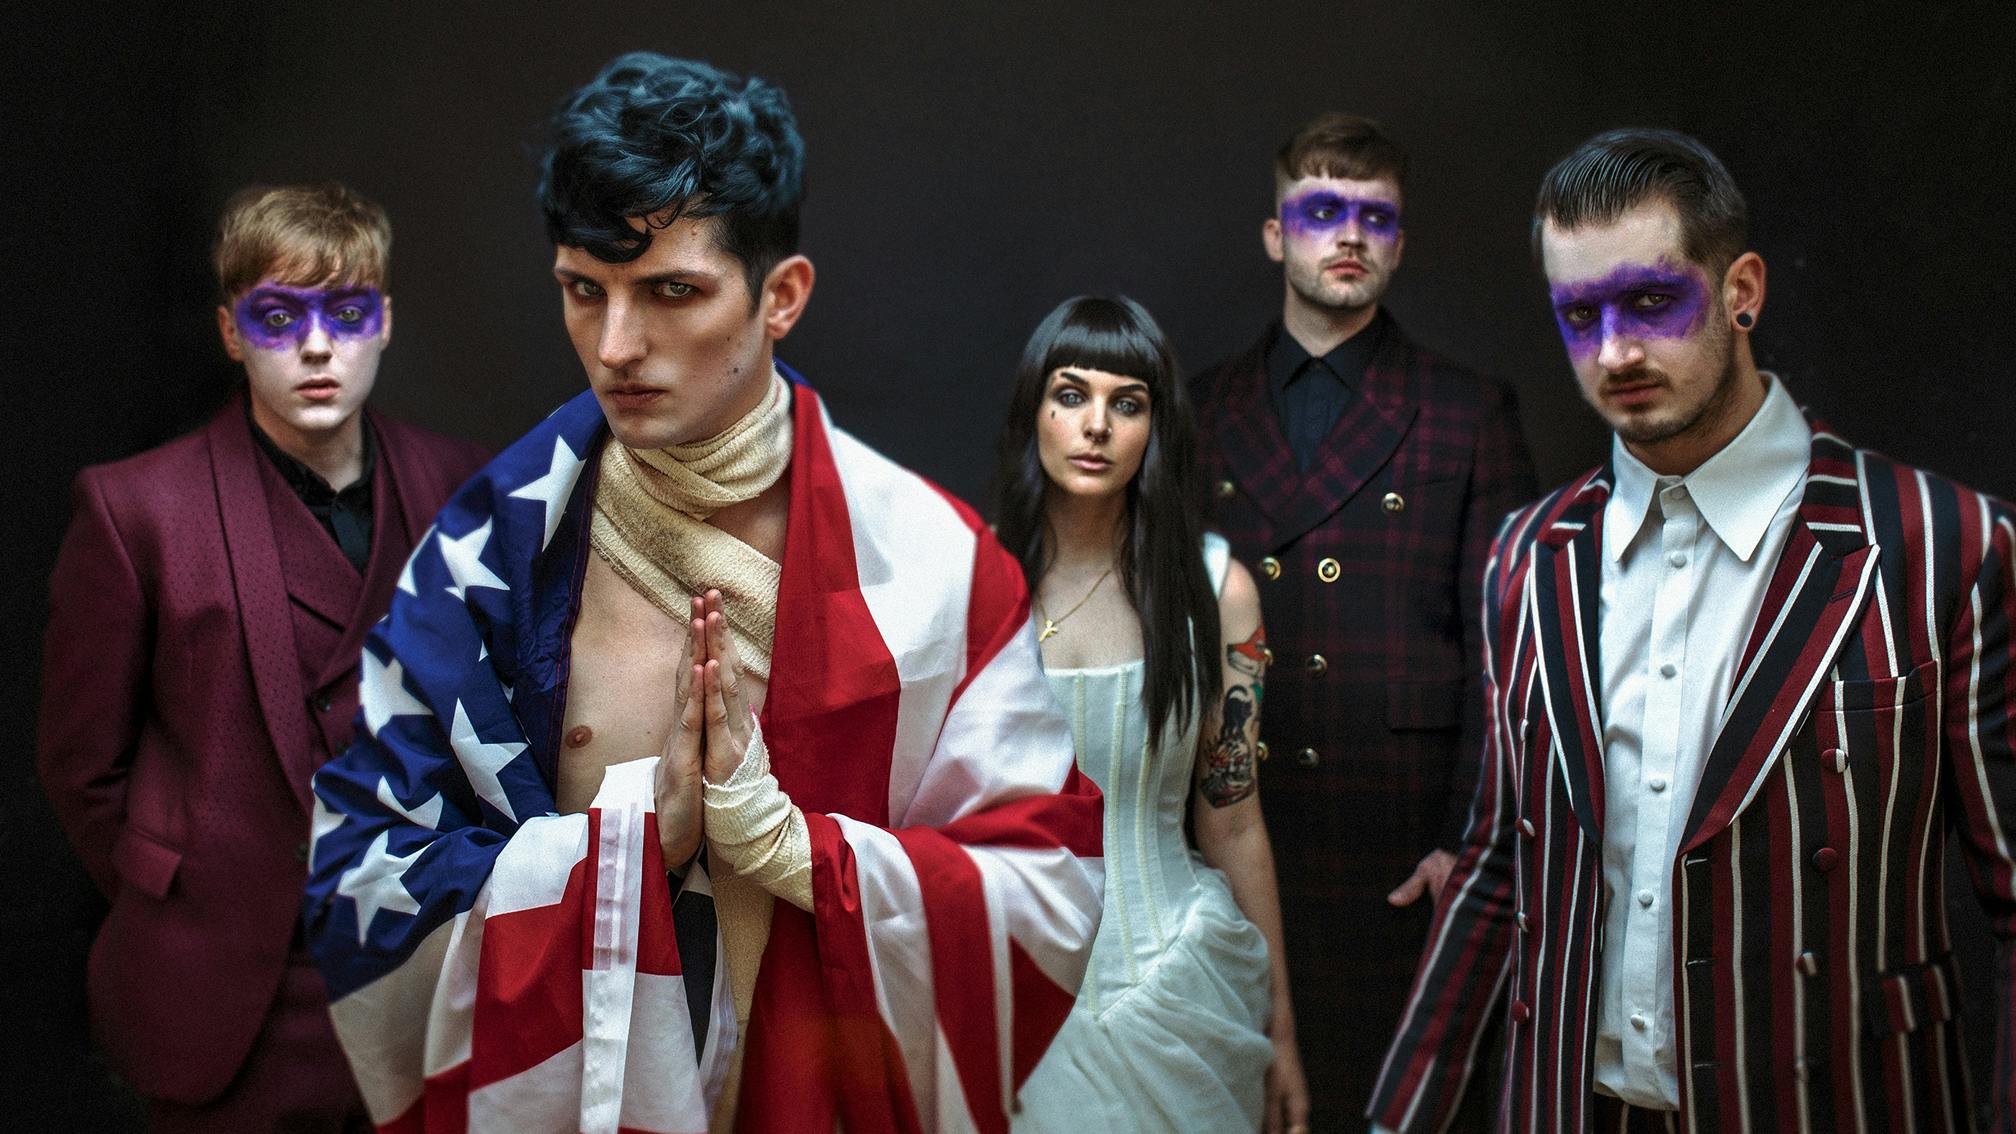 Listen to Creeper's beautifully theatrical new single, America At Night